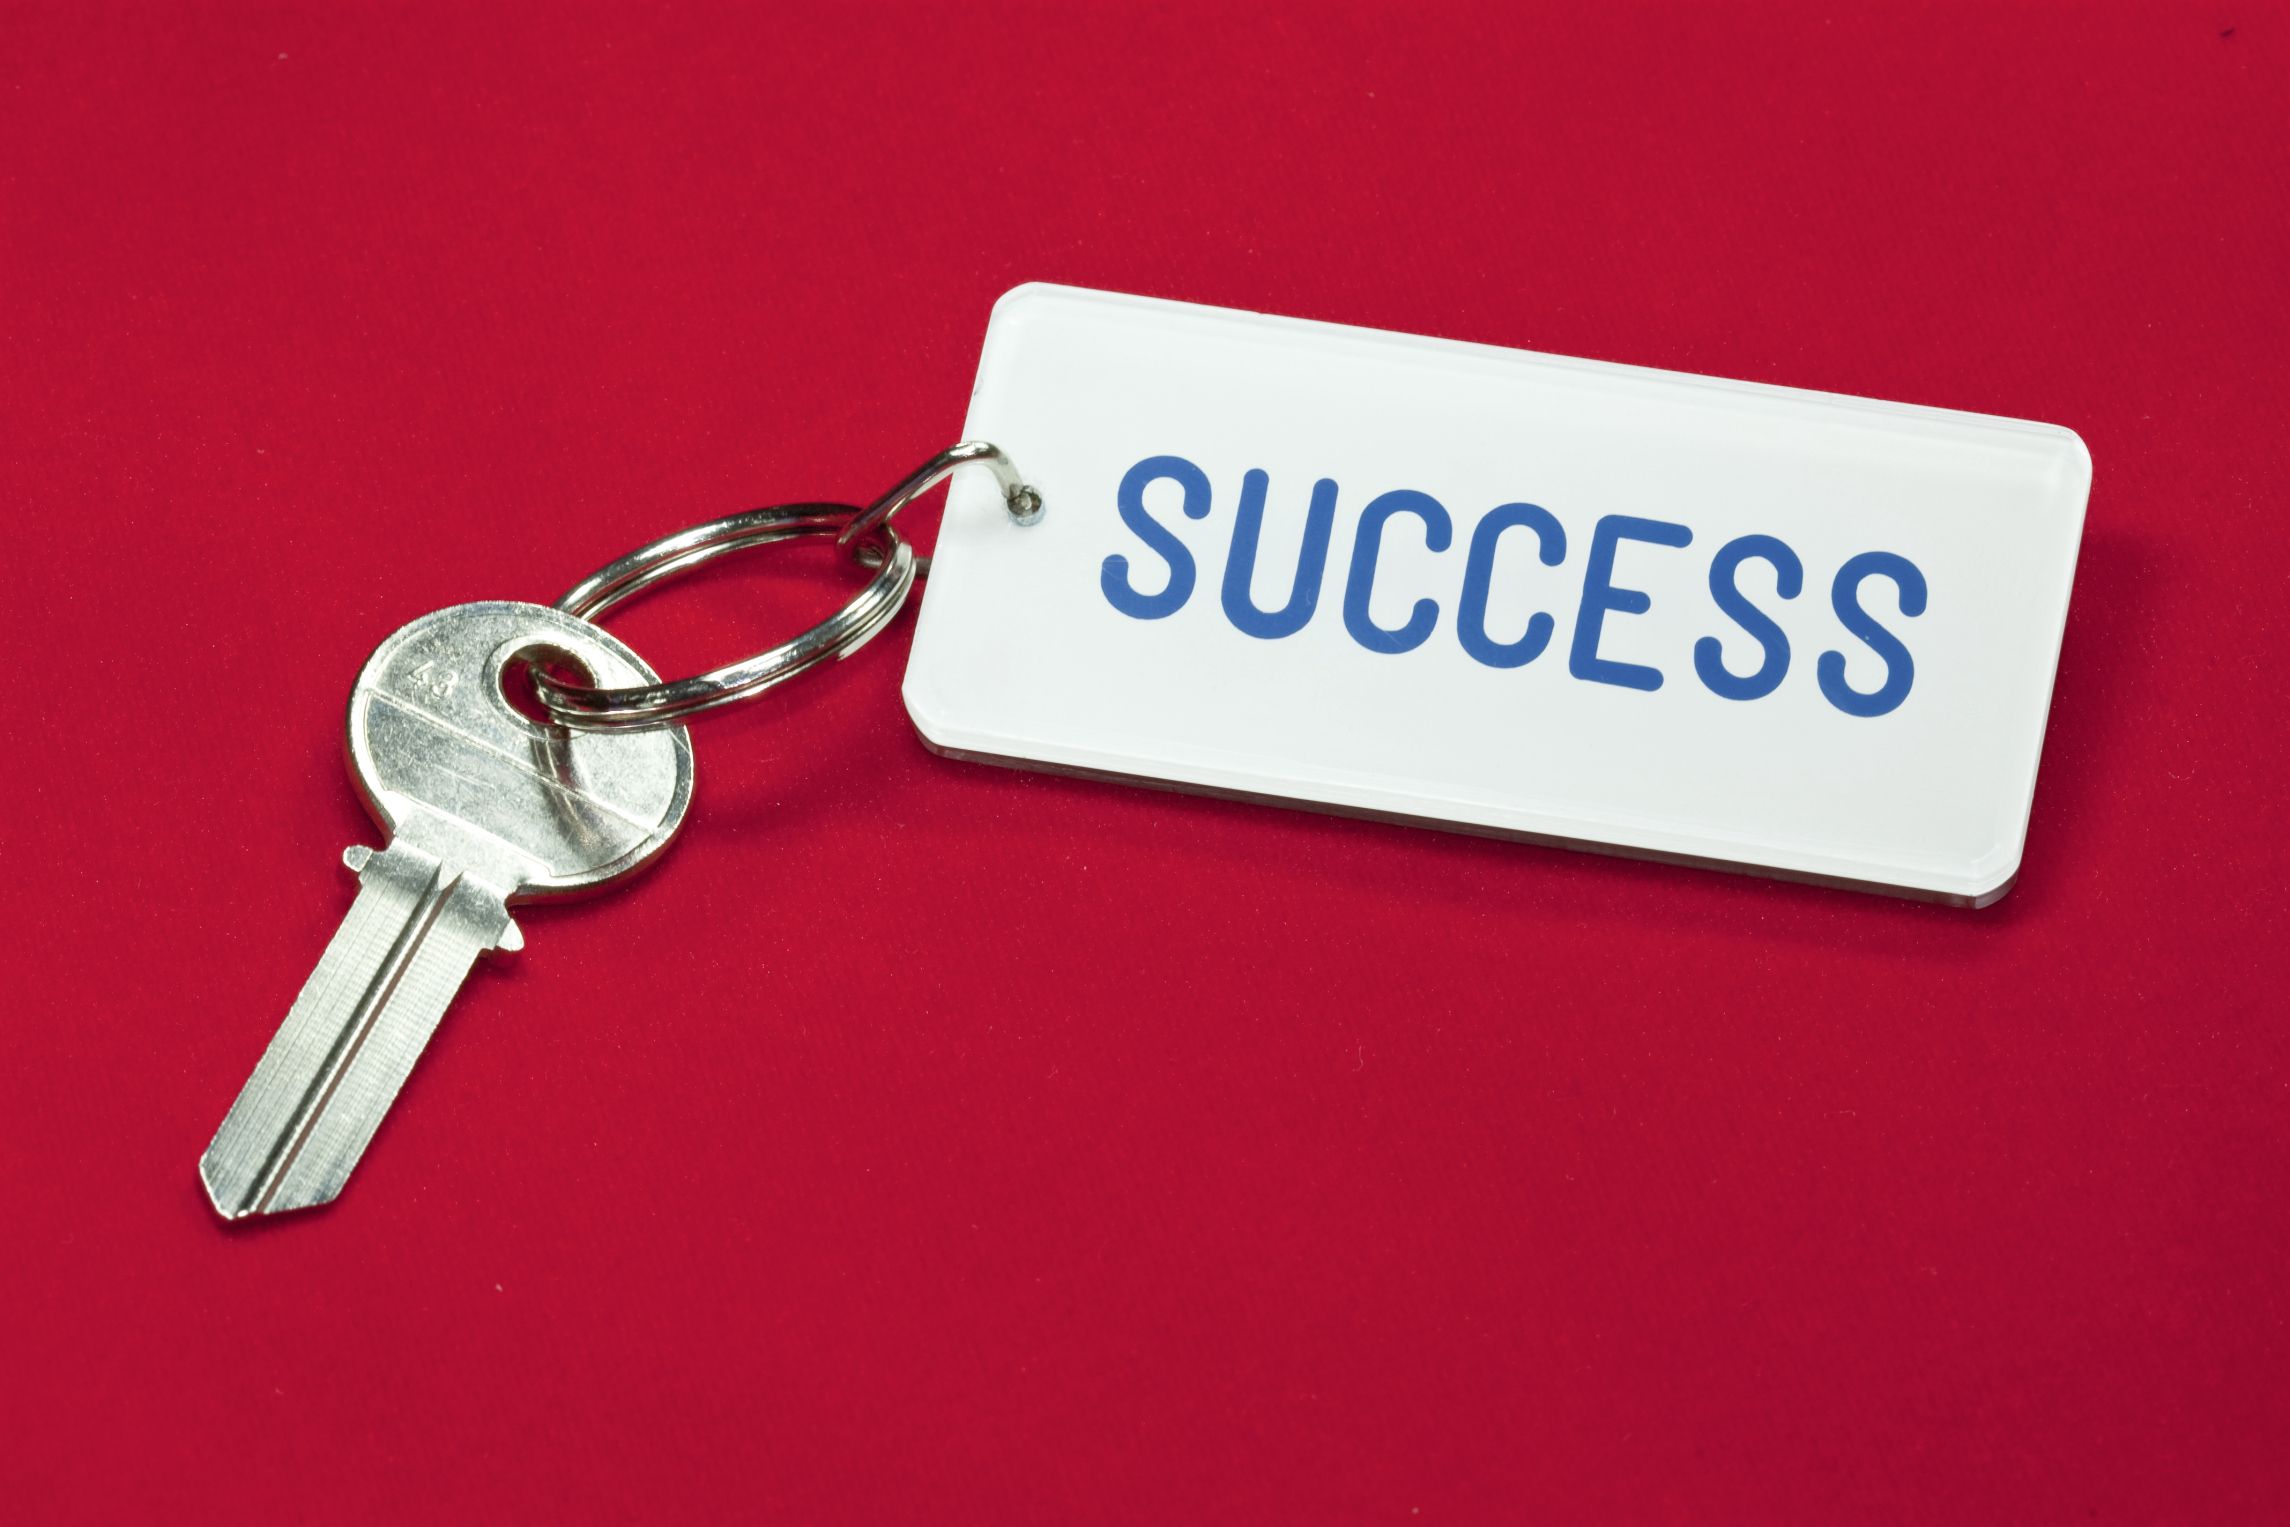 Your key to success: Keep that negativity at bay | PropertyCasualty360